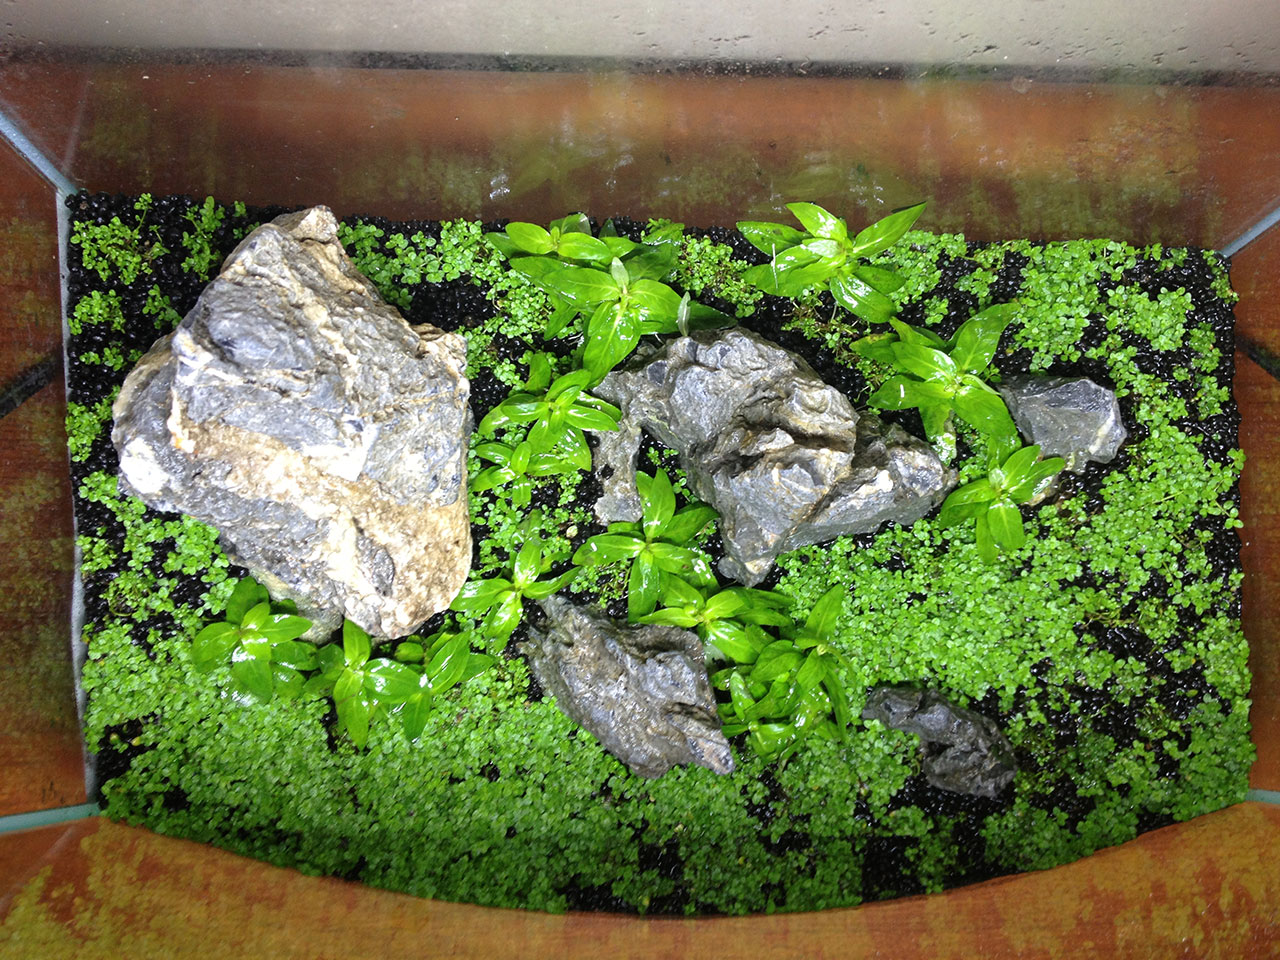 Office Nano: 3 Gallon Iwagumi (coming to an end) | The Planted Tank Forum